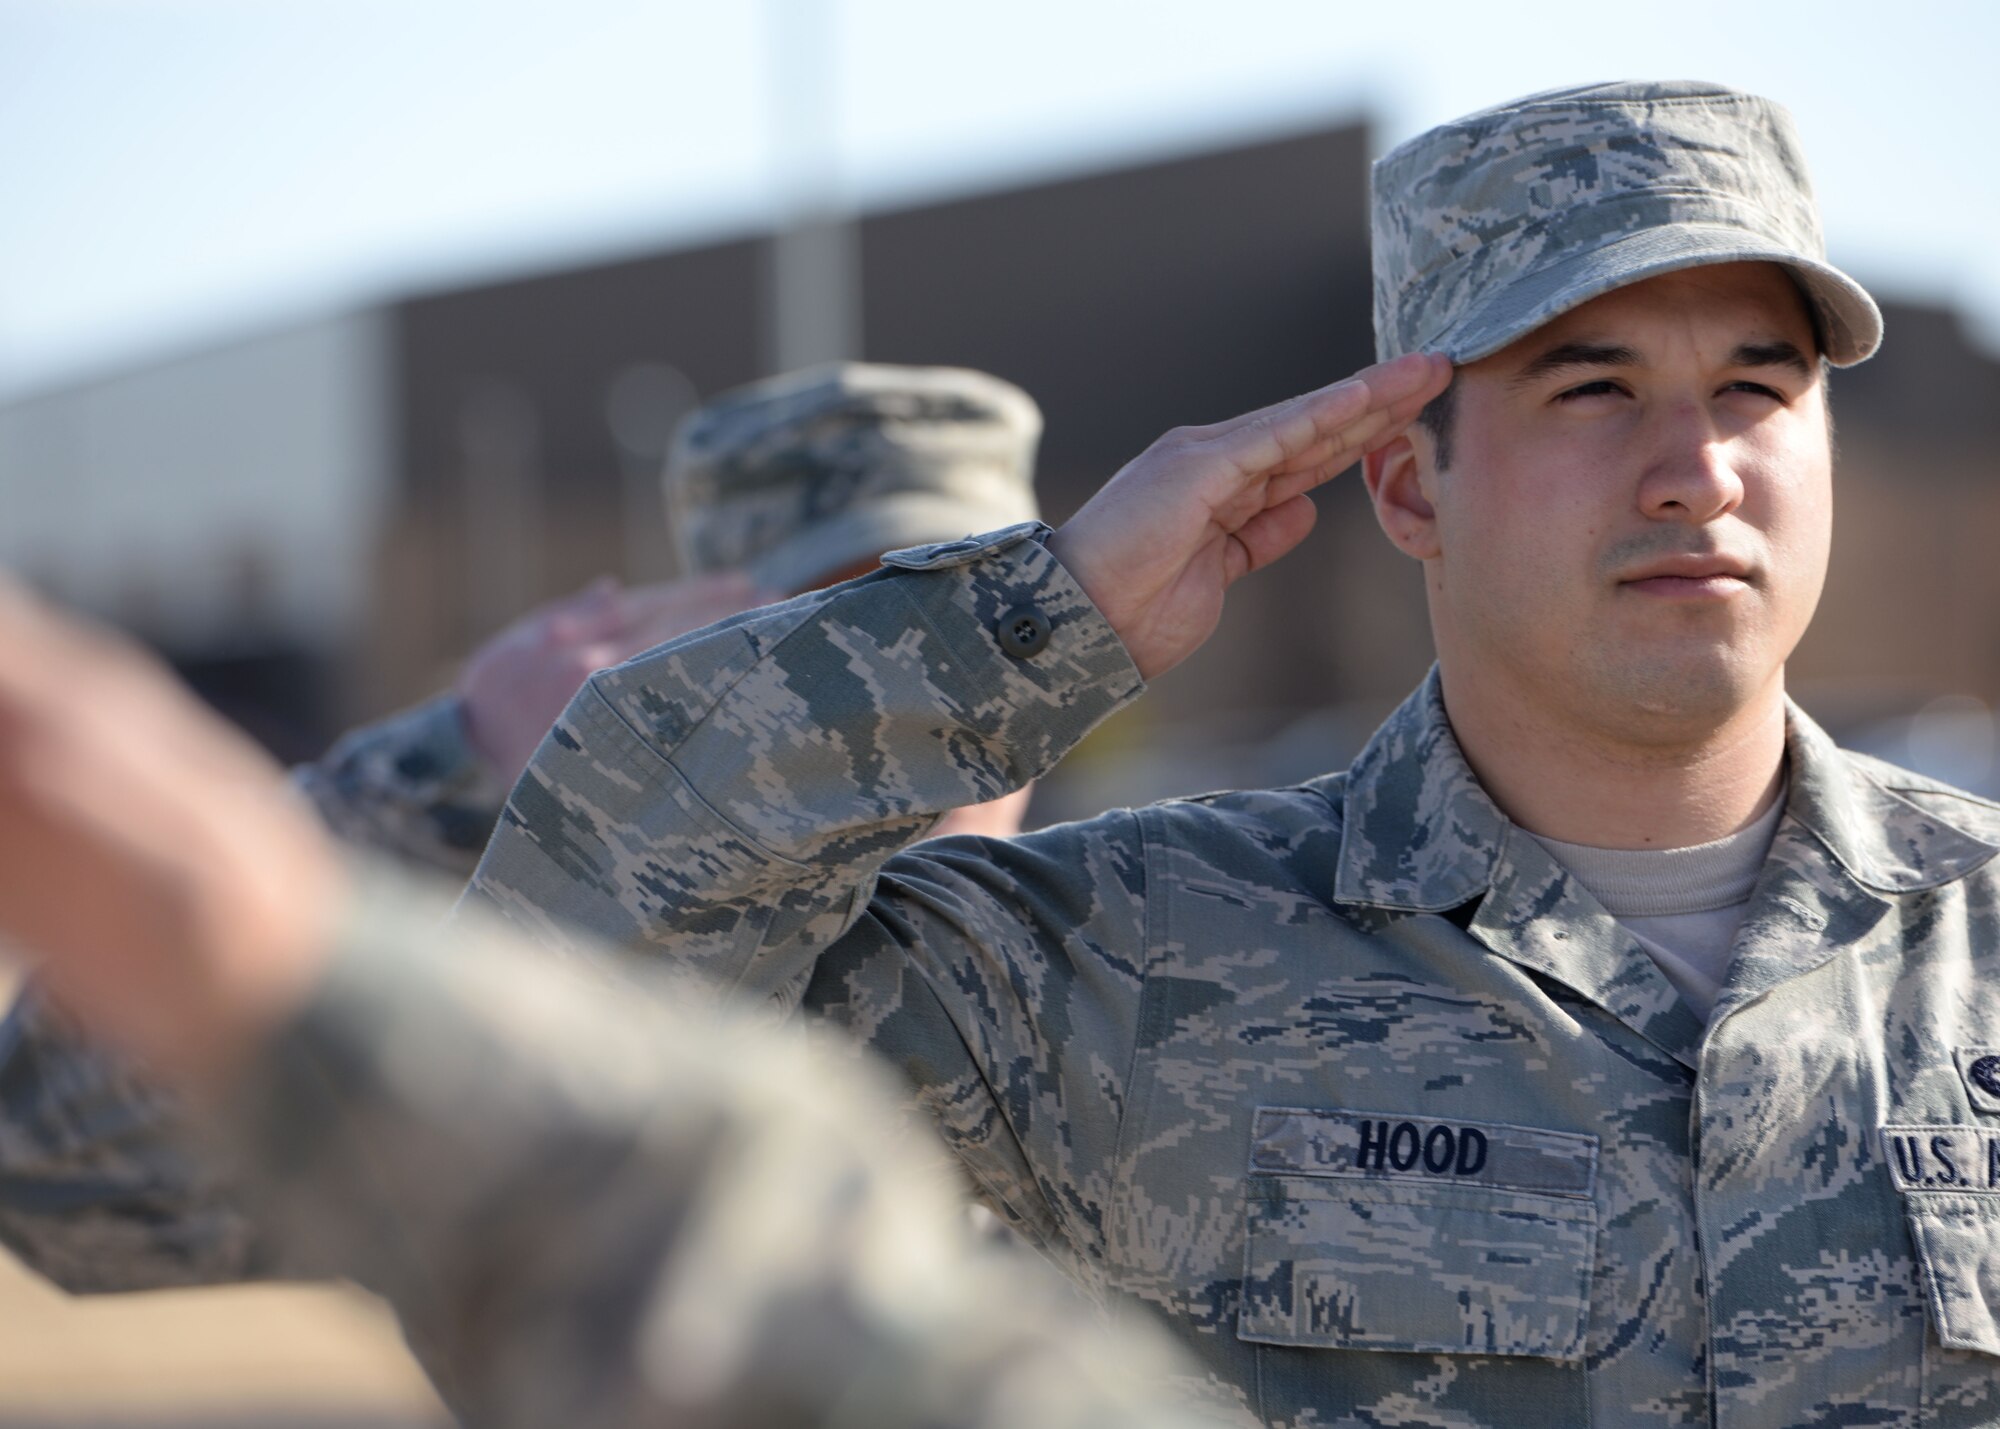 ALTUS AIR FORCE BASE, Okla. – U.S. Air Force Senior Airman Jeremy Hood, 97th Logistics Readiness Squadron, salutes while standing in formation at the Airman Leadership School parade training area Jan. 15, 2014. During ALS, Airmen hone their knowledge of military customs and courtesies and learn to become more effective leaders by supervising Airmen and becoming better communicators. (U.S. Air Force photo by Senior Airman Levin Boland/Released)